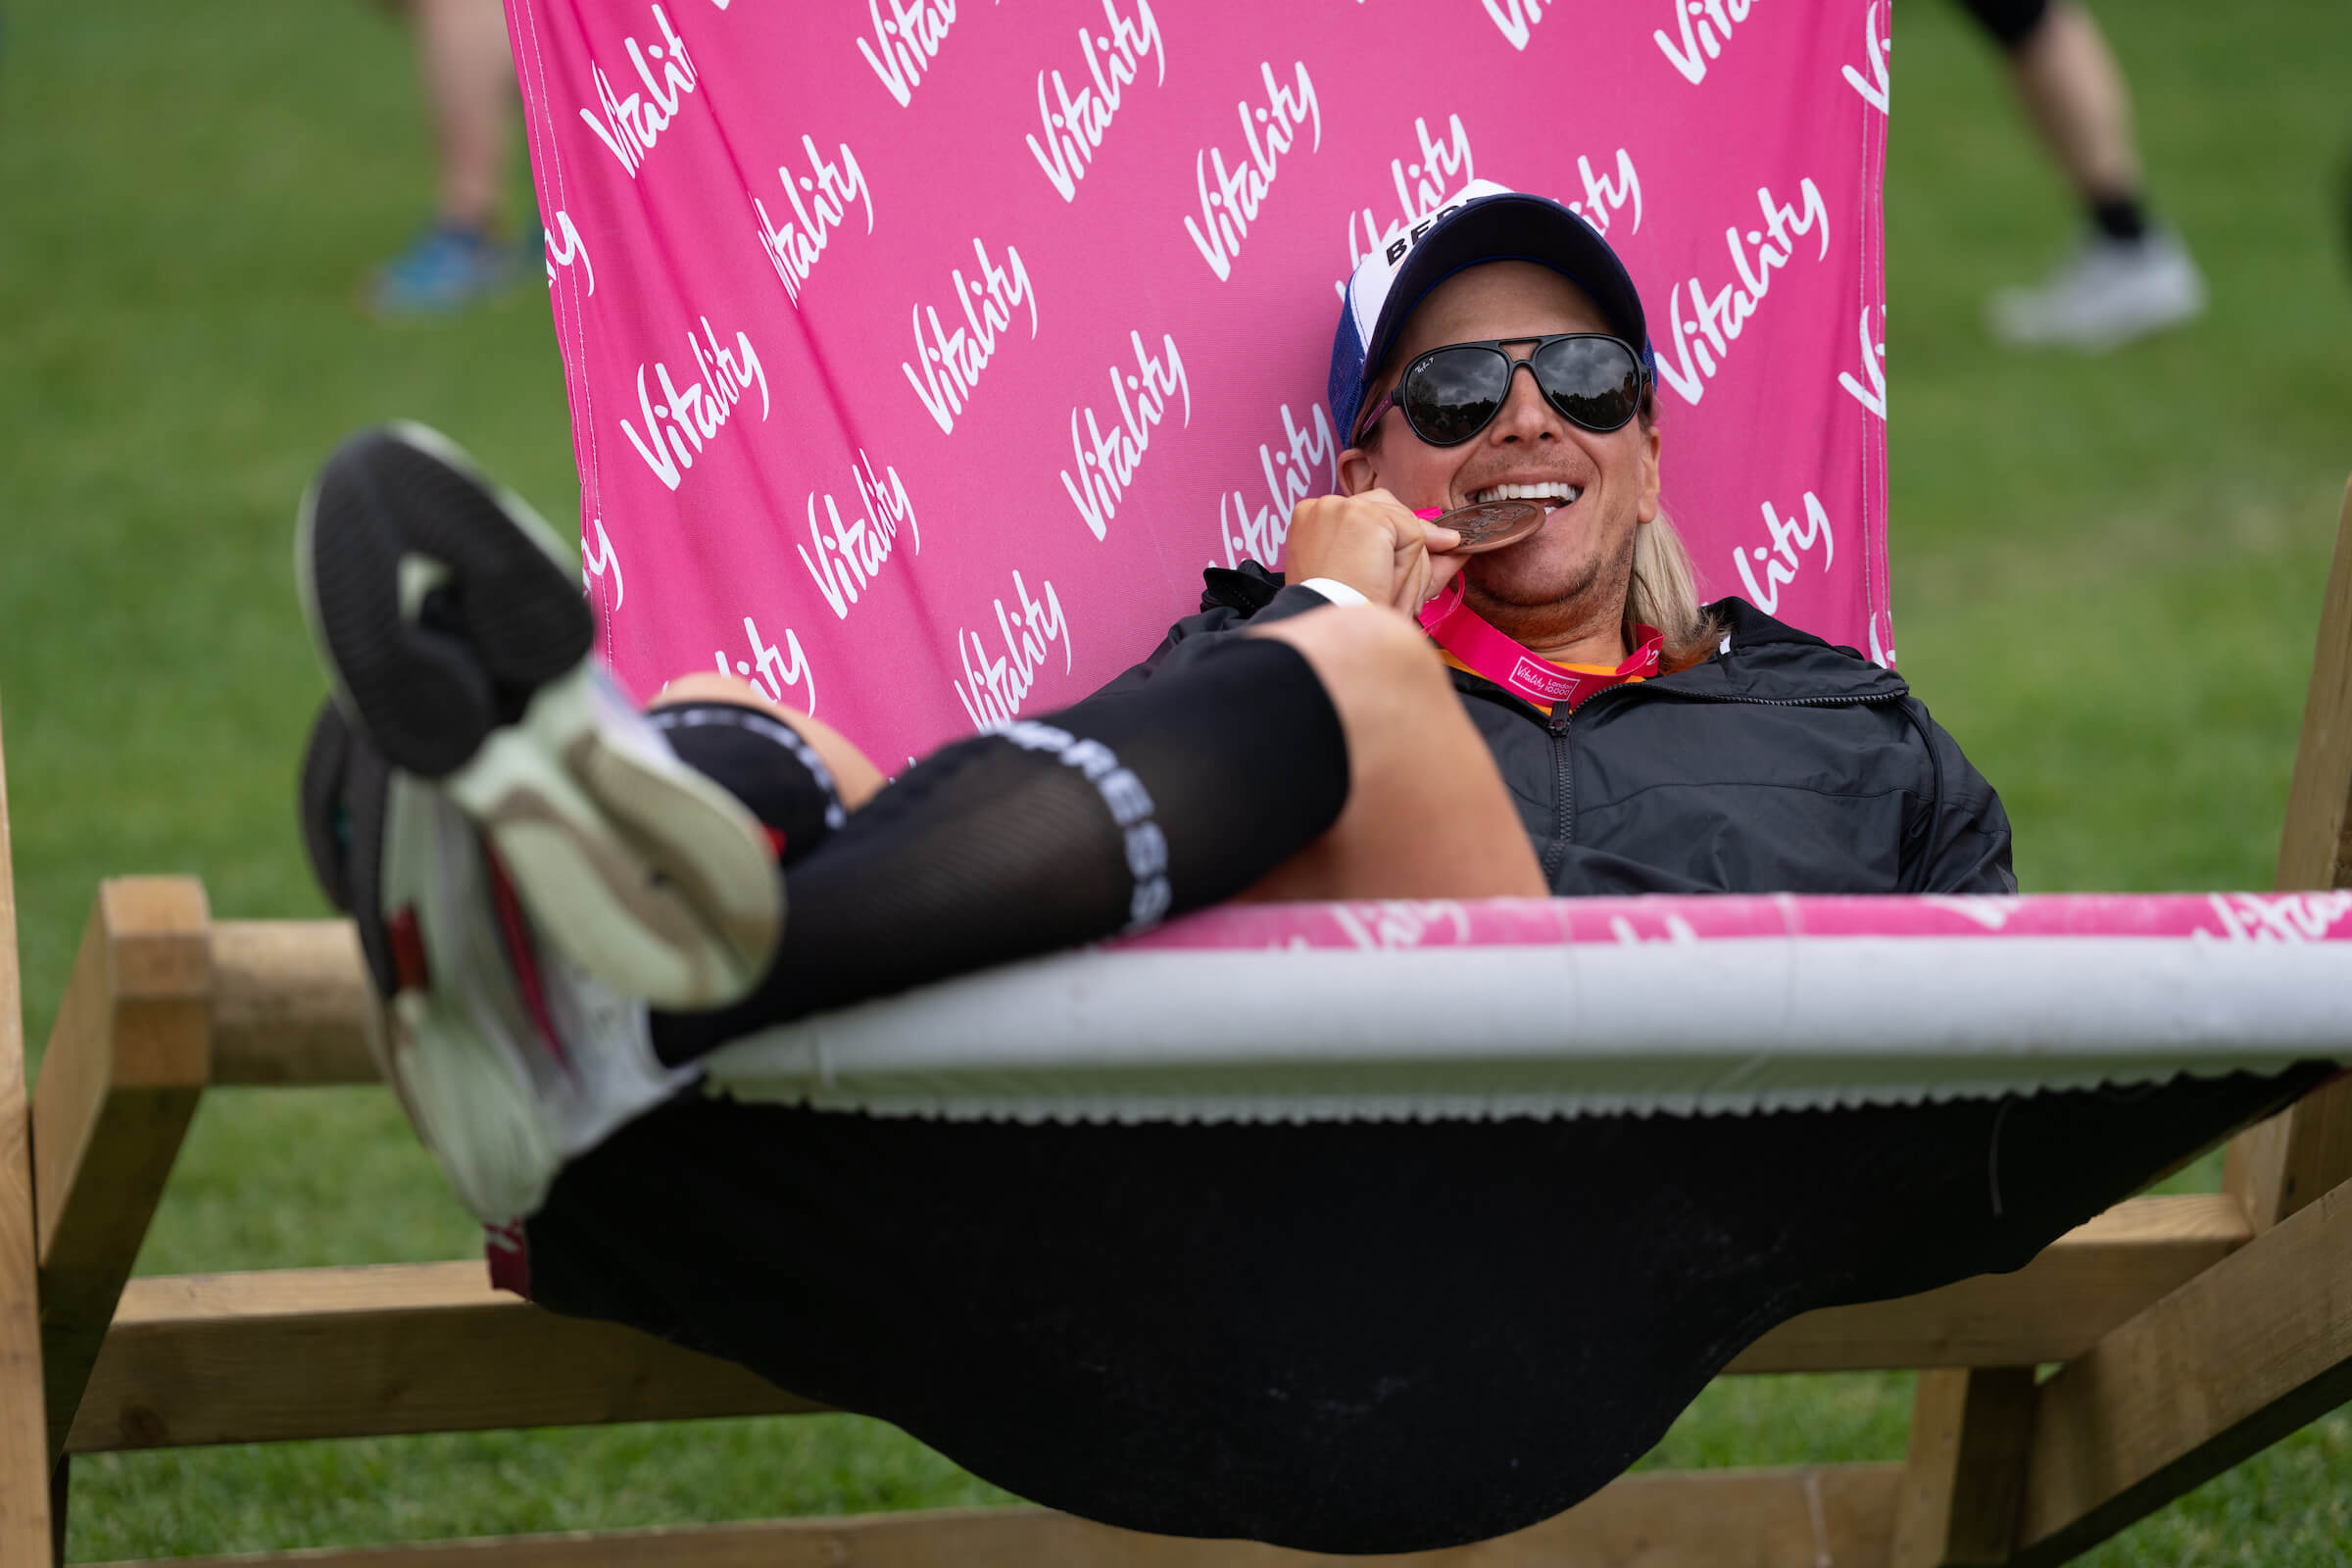 A runner relaxes at the Vitality Wellness Festival